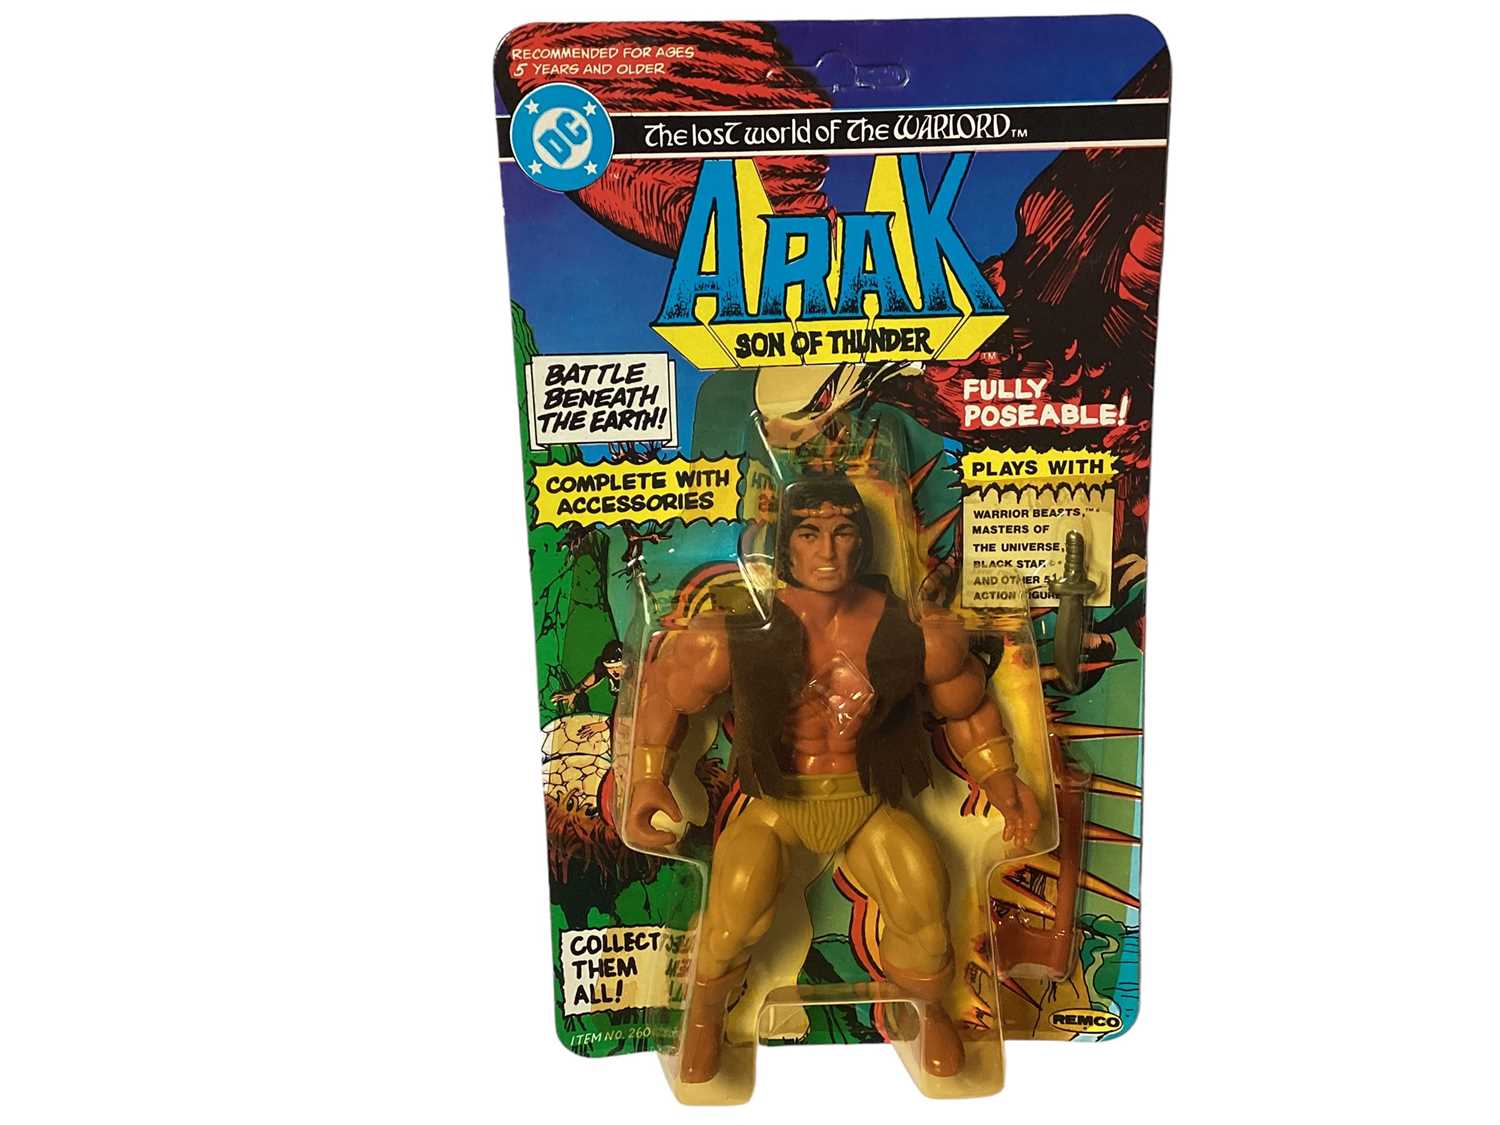 Remco DC Comics (c1982) The lost World of the Warlord 5 1/2" action figures including Mikola, Arak, - Image 2 of 5